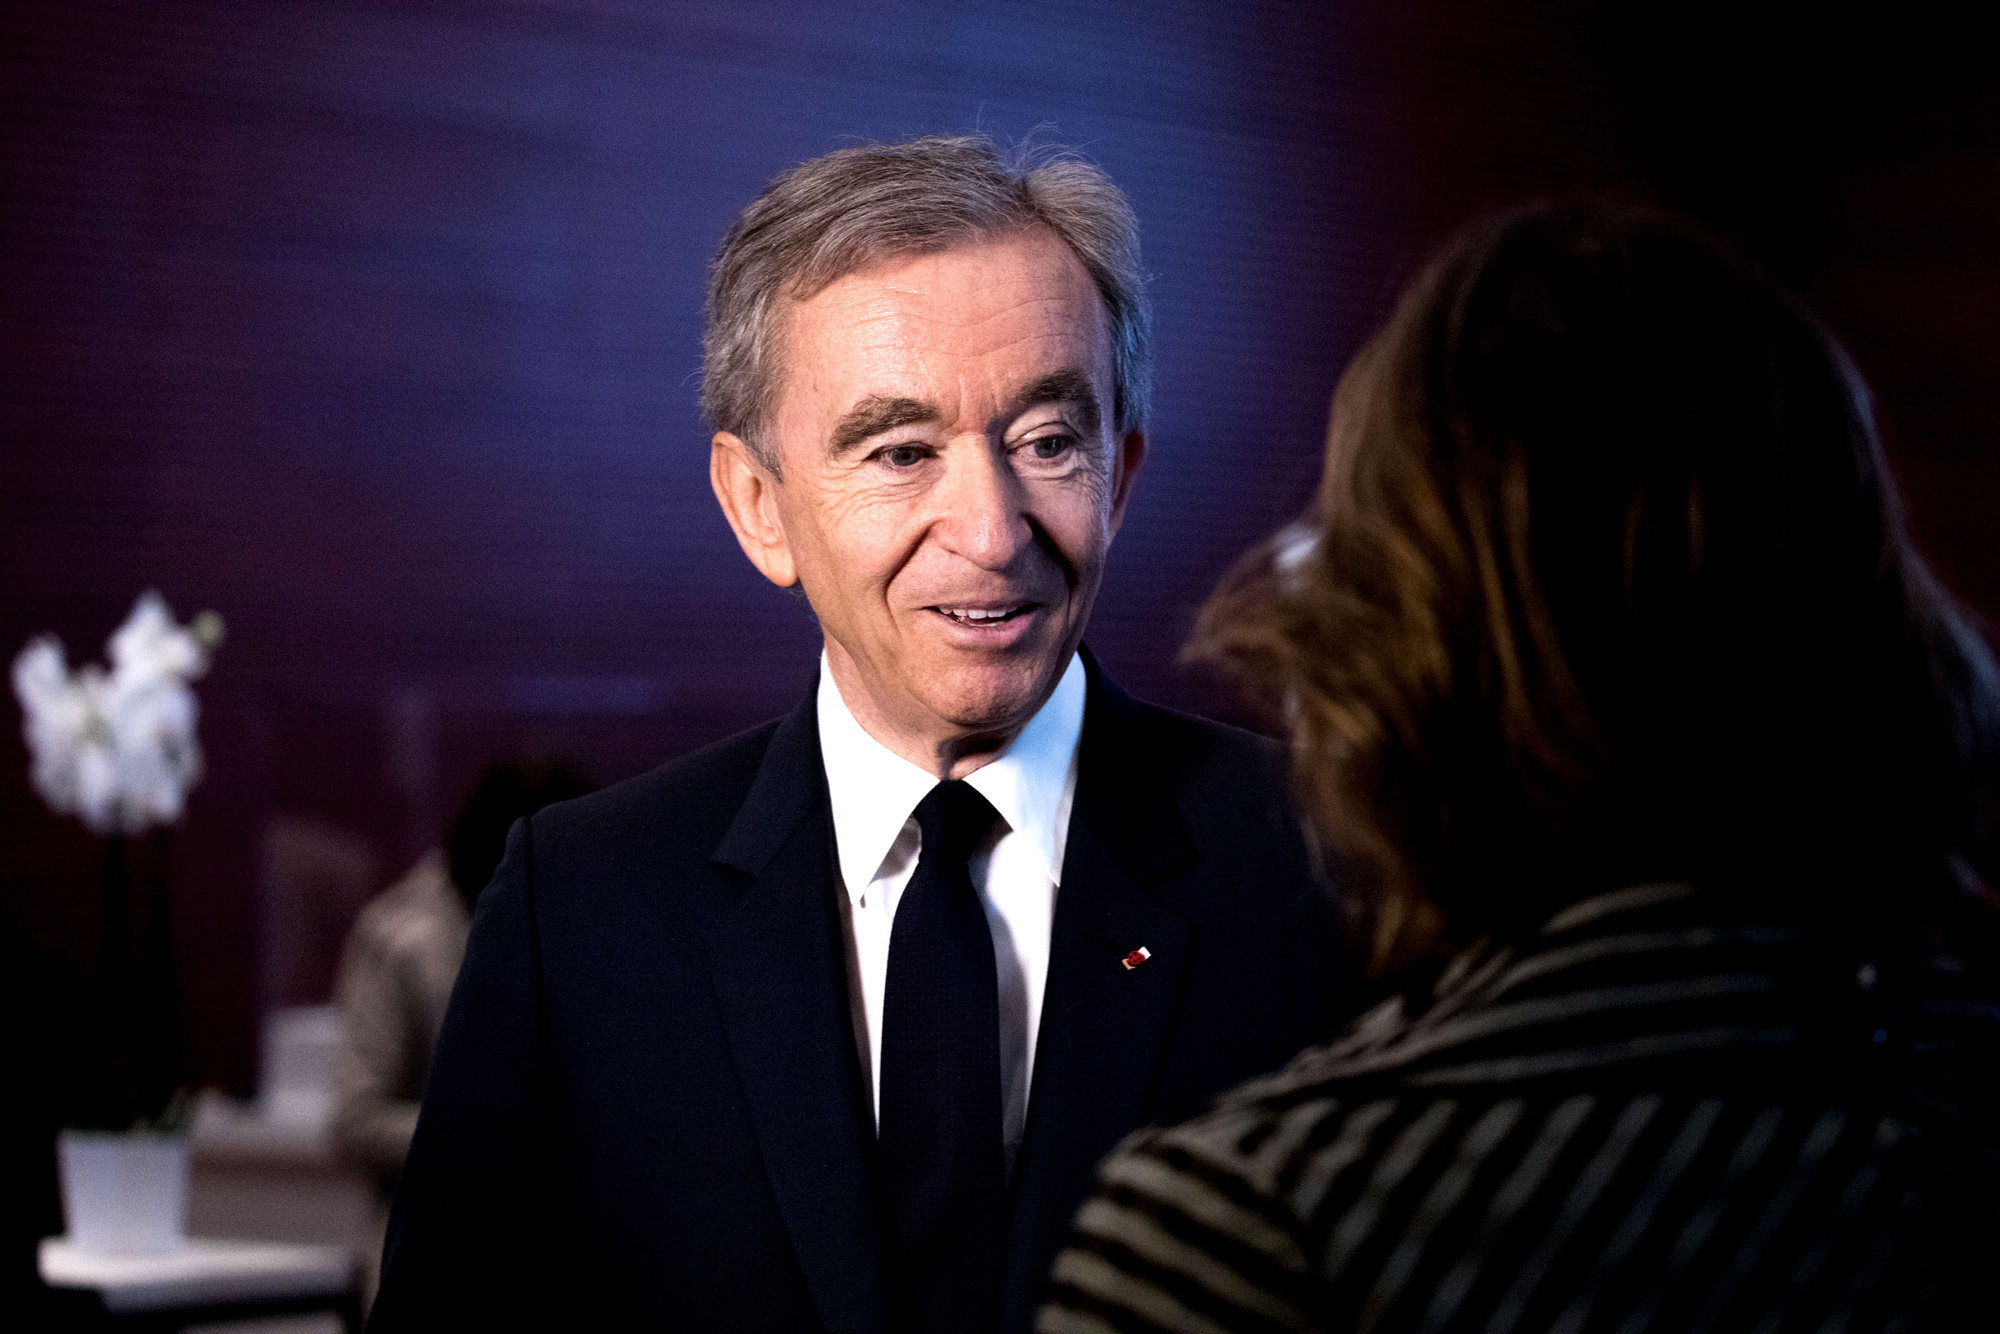 LVMH's CEO Bernard Arnault Crowned The Richest Man In Fashion